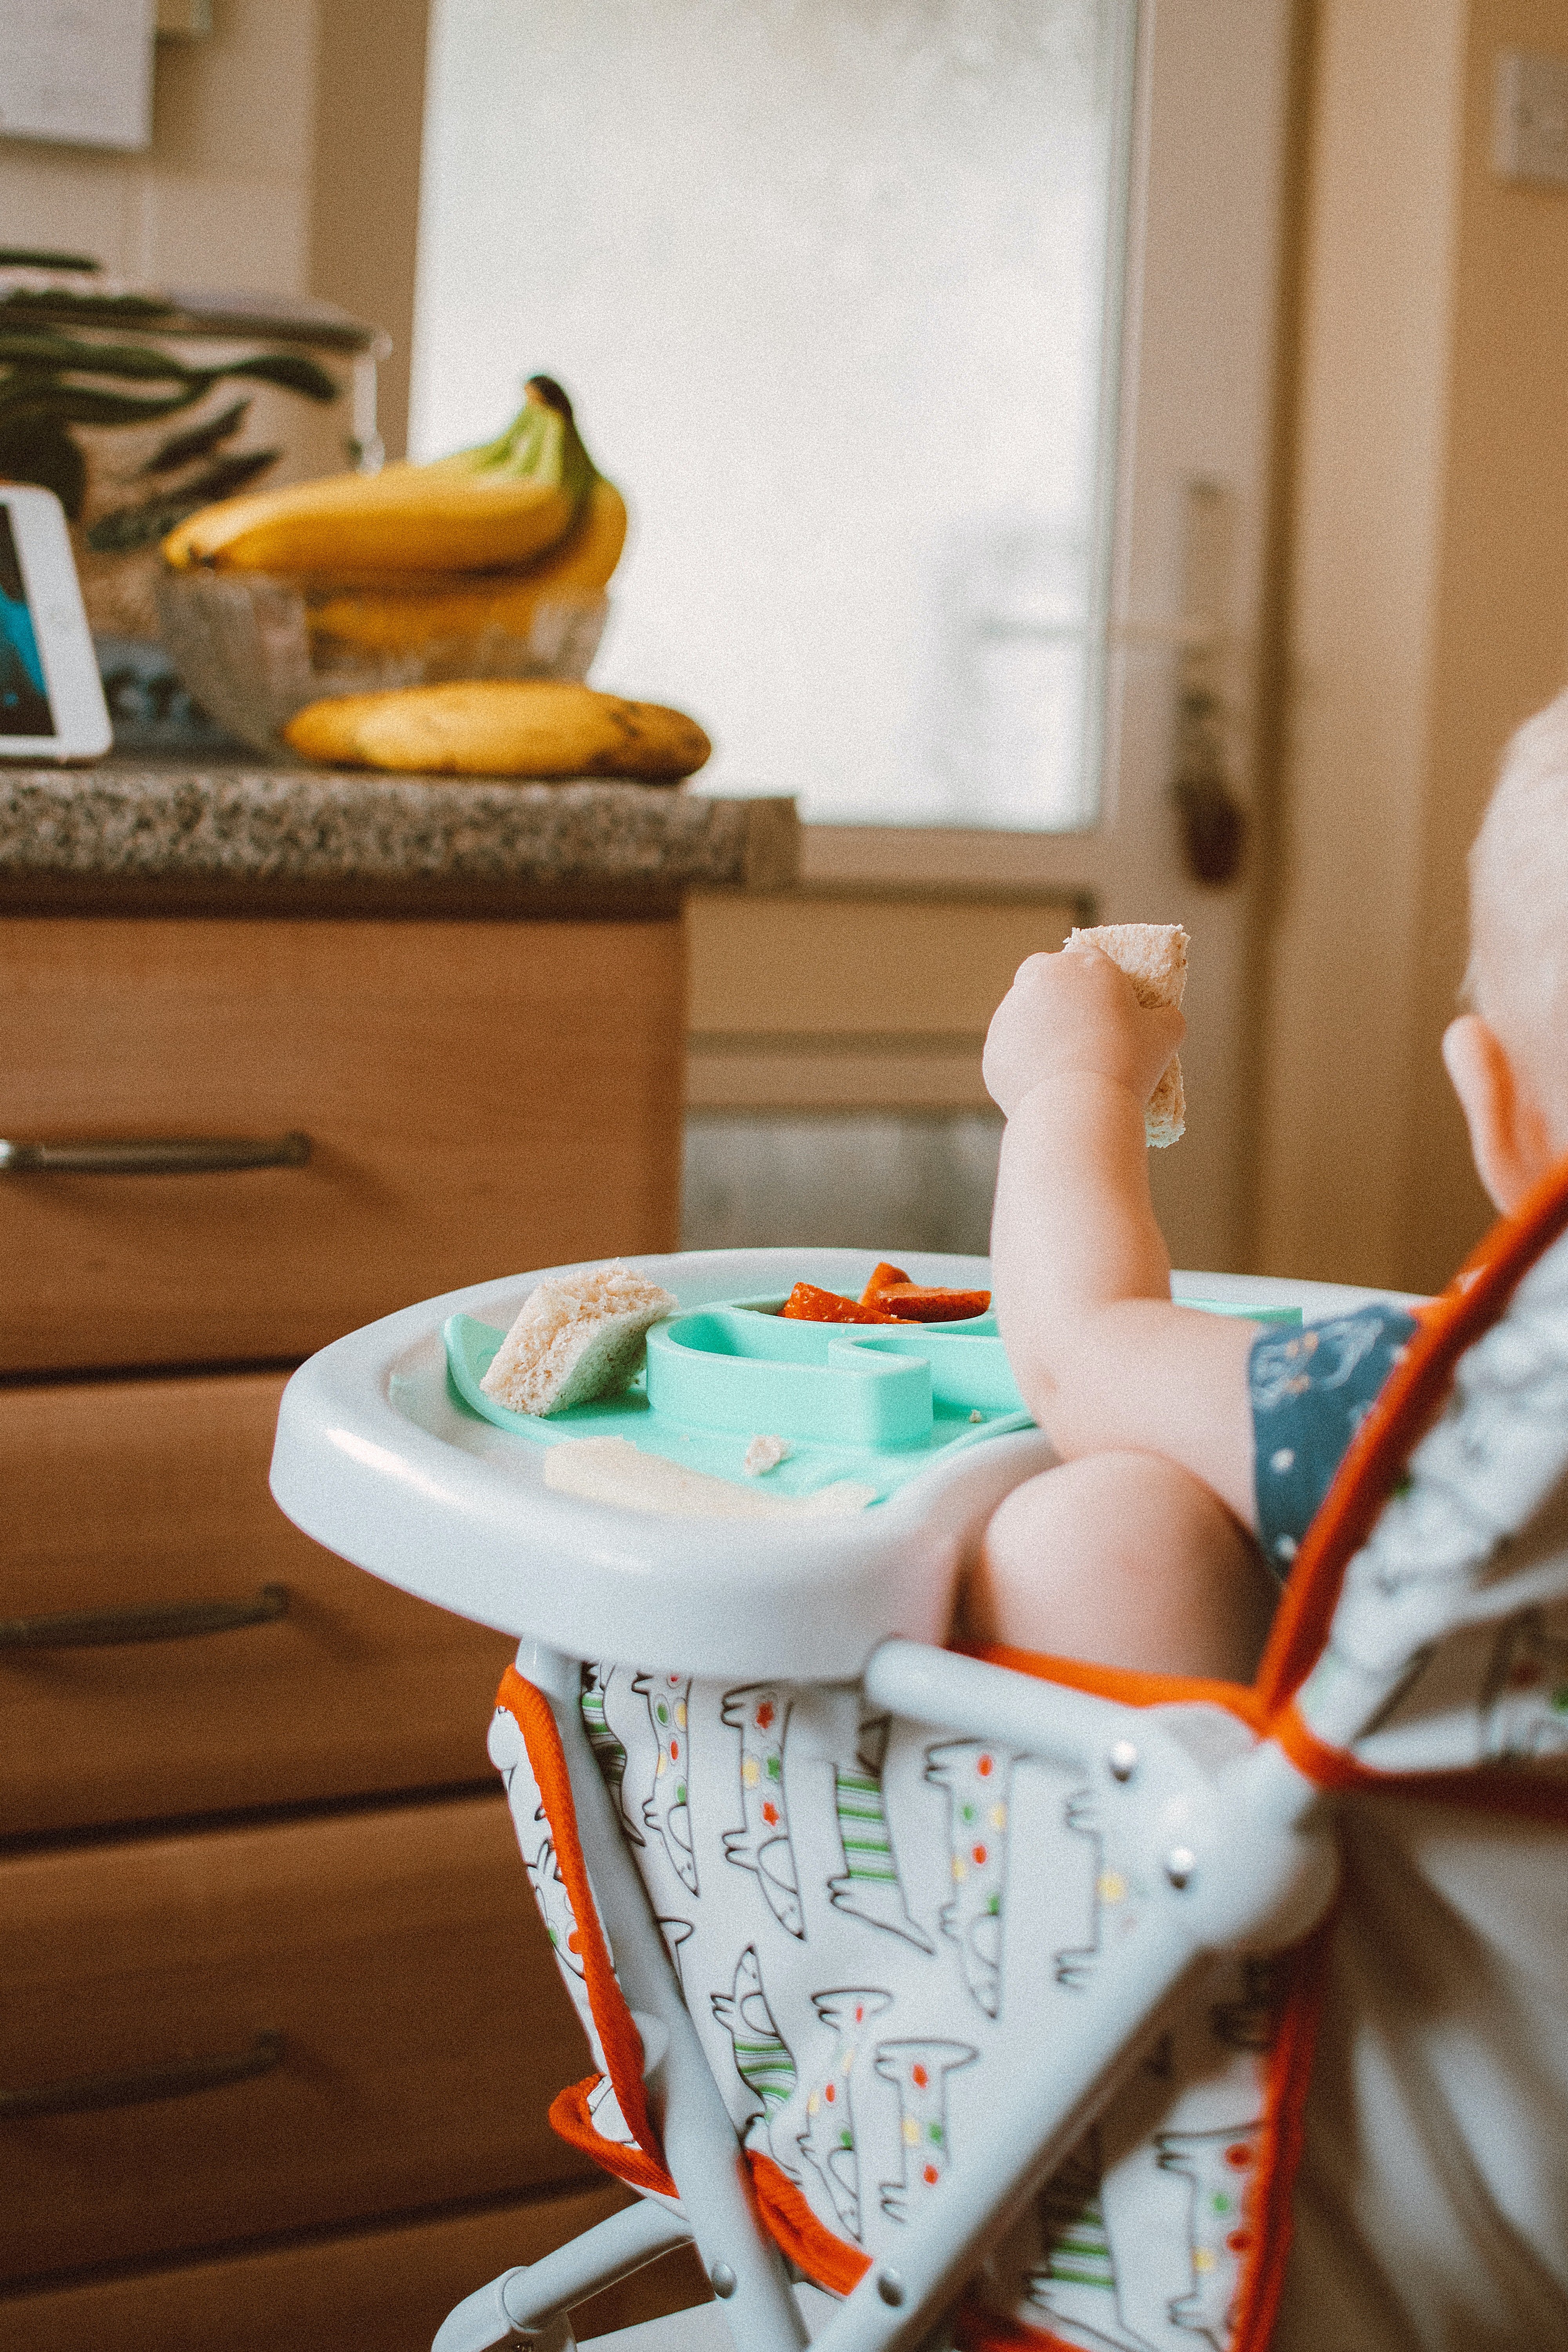 Daisy decided to buy her daughter a feeding chair. | Source: Pexels